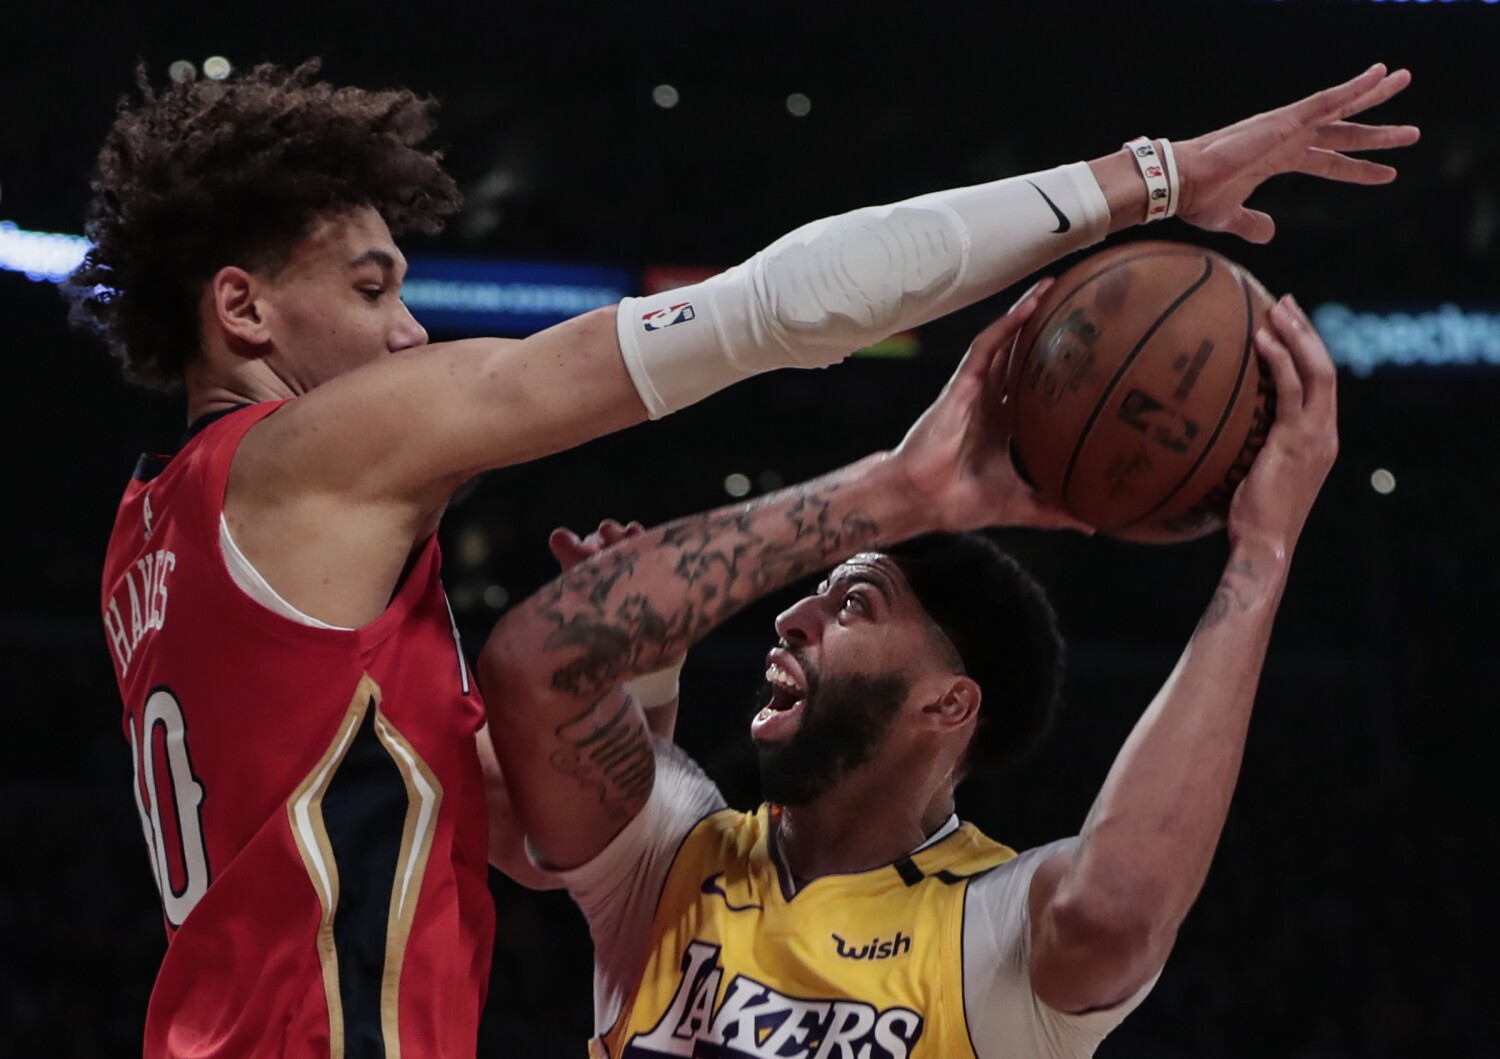 NBA player Jaxson Hayes arrested after altercation with officers, LAPD says